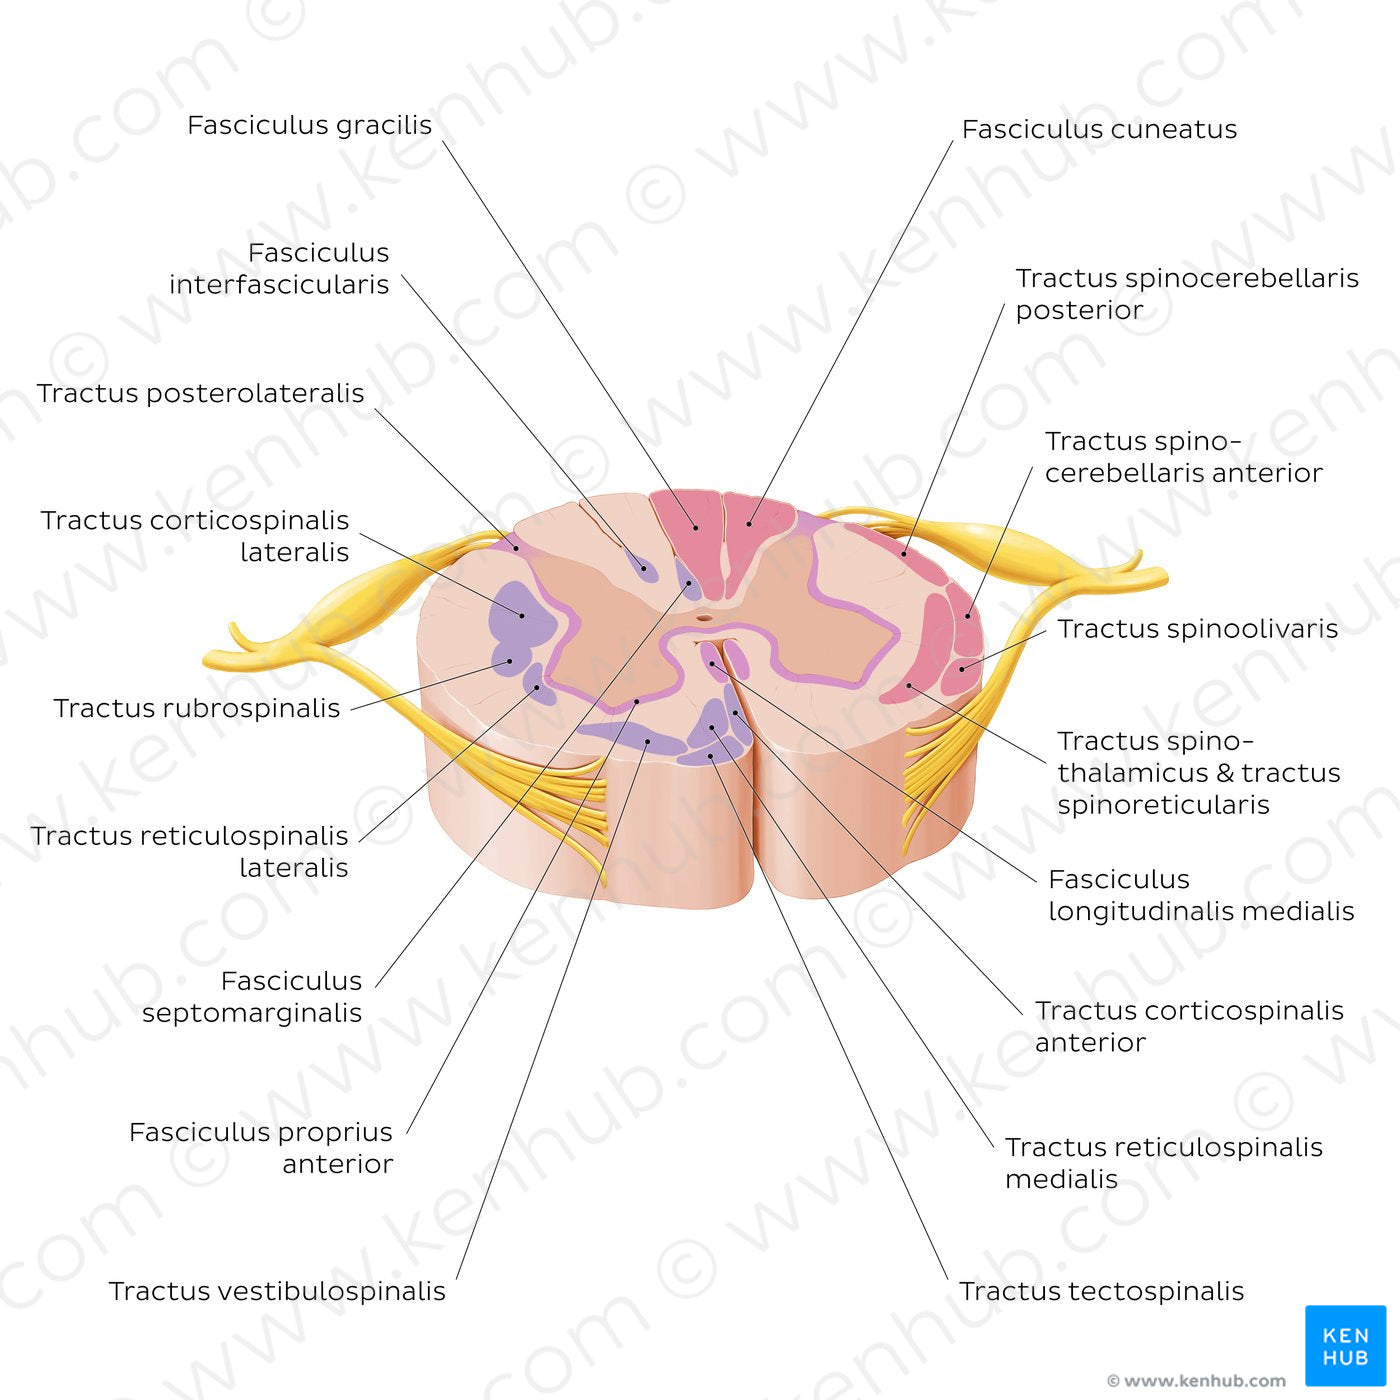 Spinal cord: Cross section (ascending and descending tracts) (Latin)